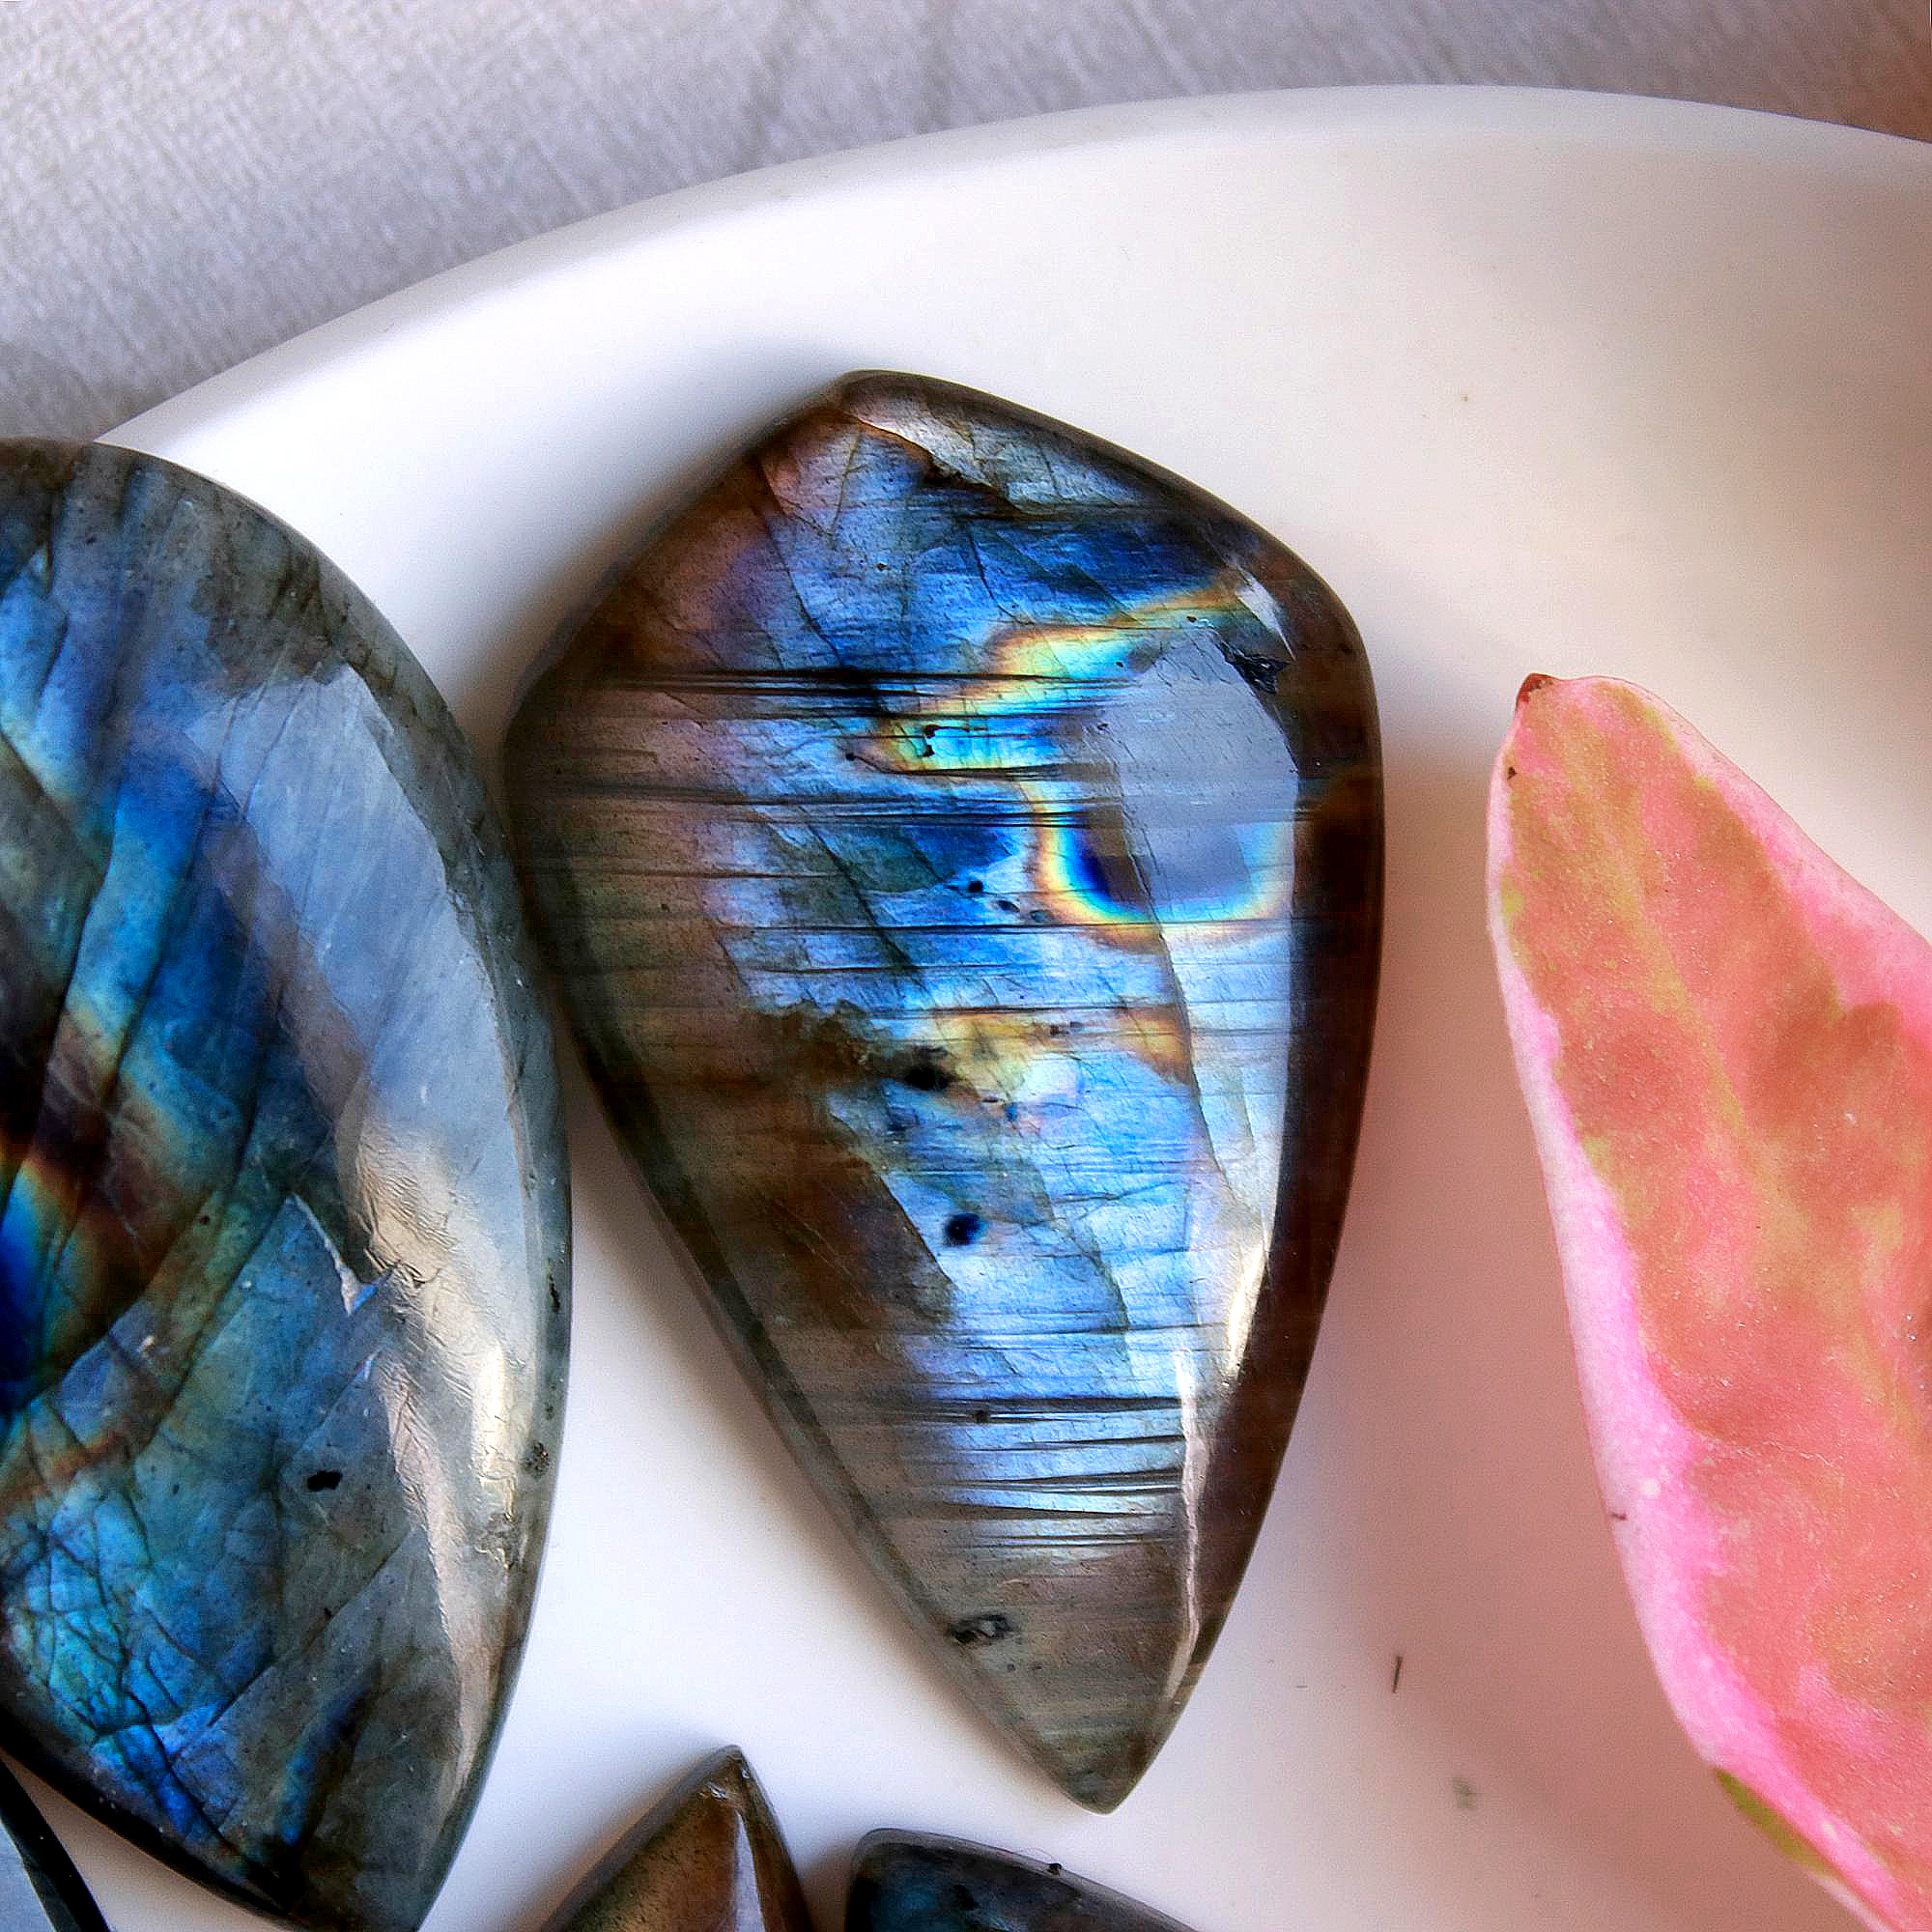 6 Pcs268Cts Natural Multifire Labradorite Loose Cabochon Gemstone Lot Both Side Polished For Jewelry Making 47x22 31x20mm#1106